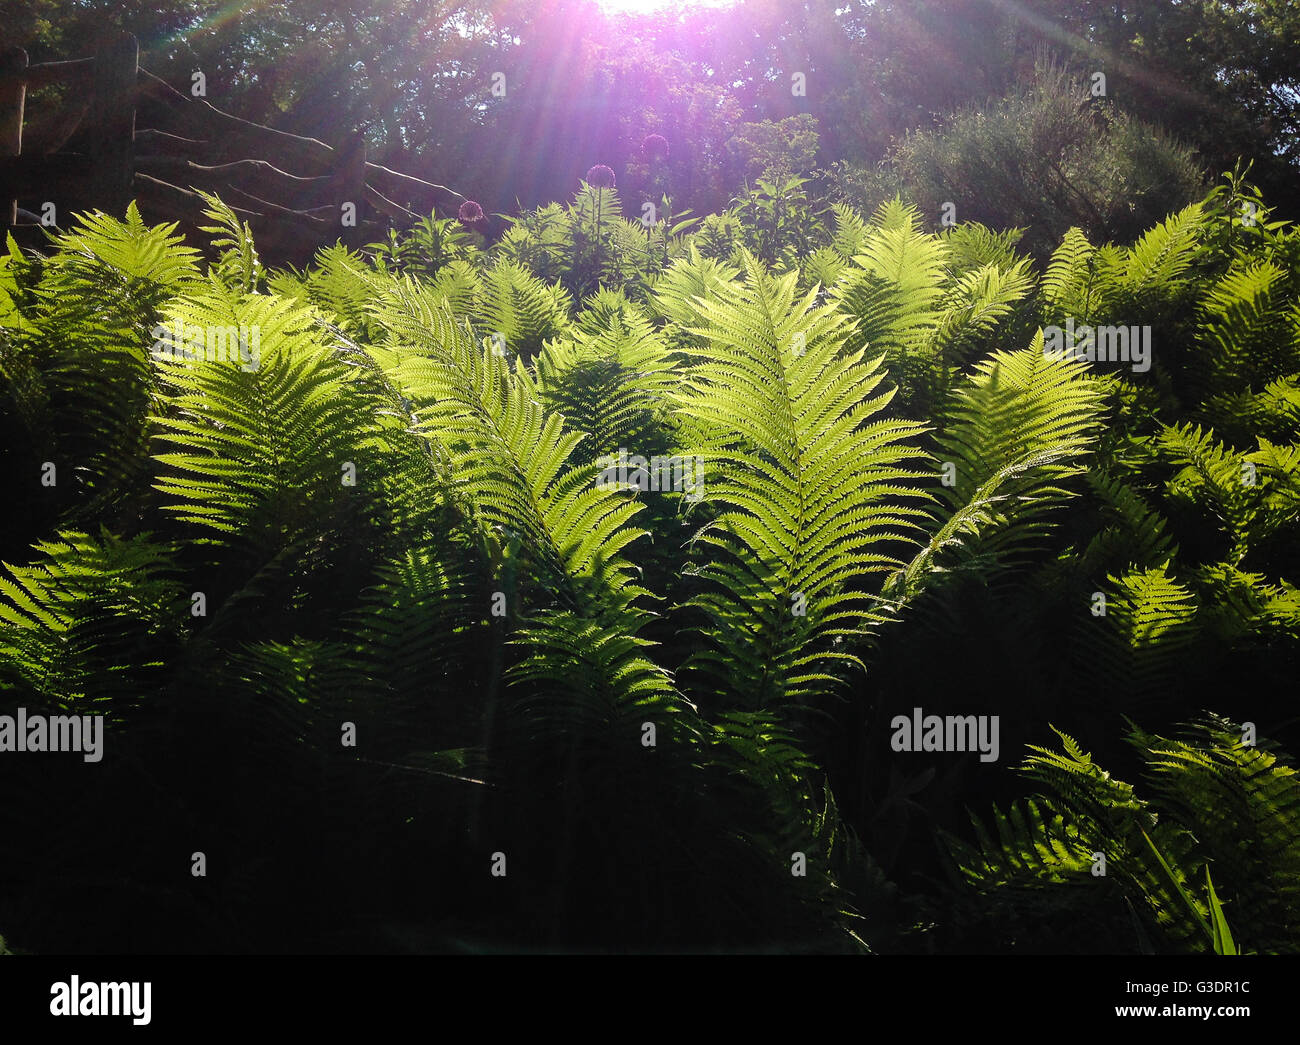 Early morning sun and green ferns Stock Photo - Alamy